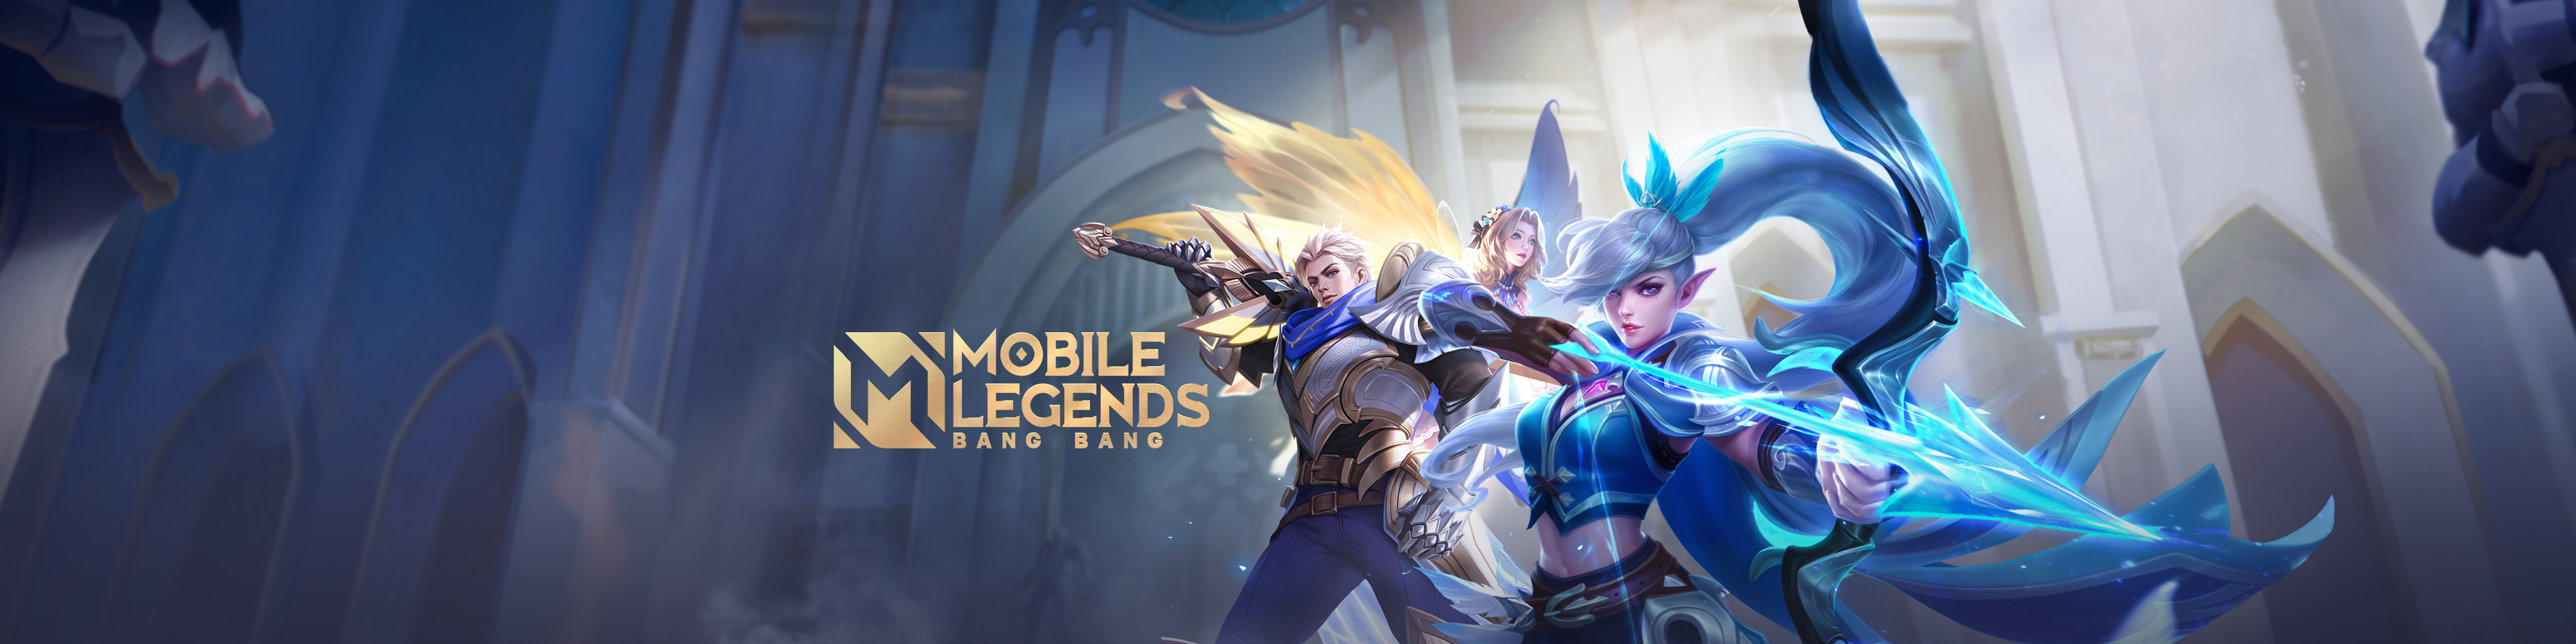 25++ 5 mobile legends support that is lower ideas